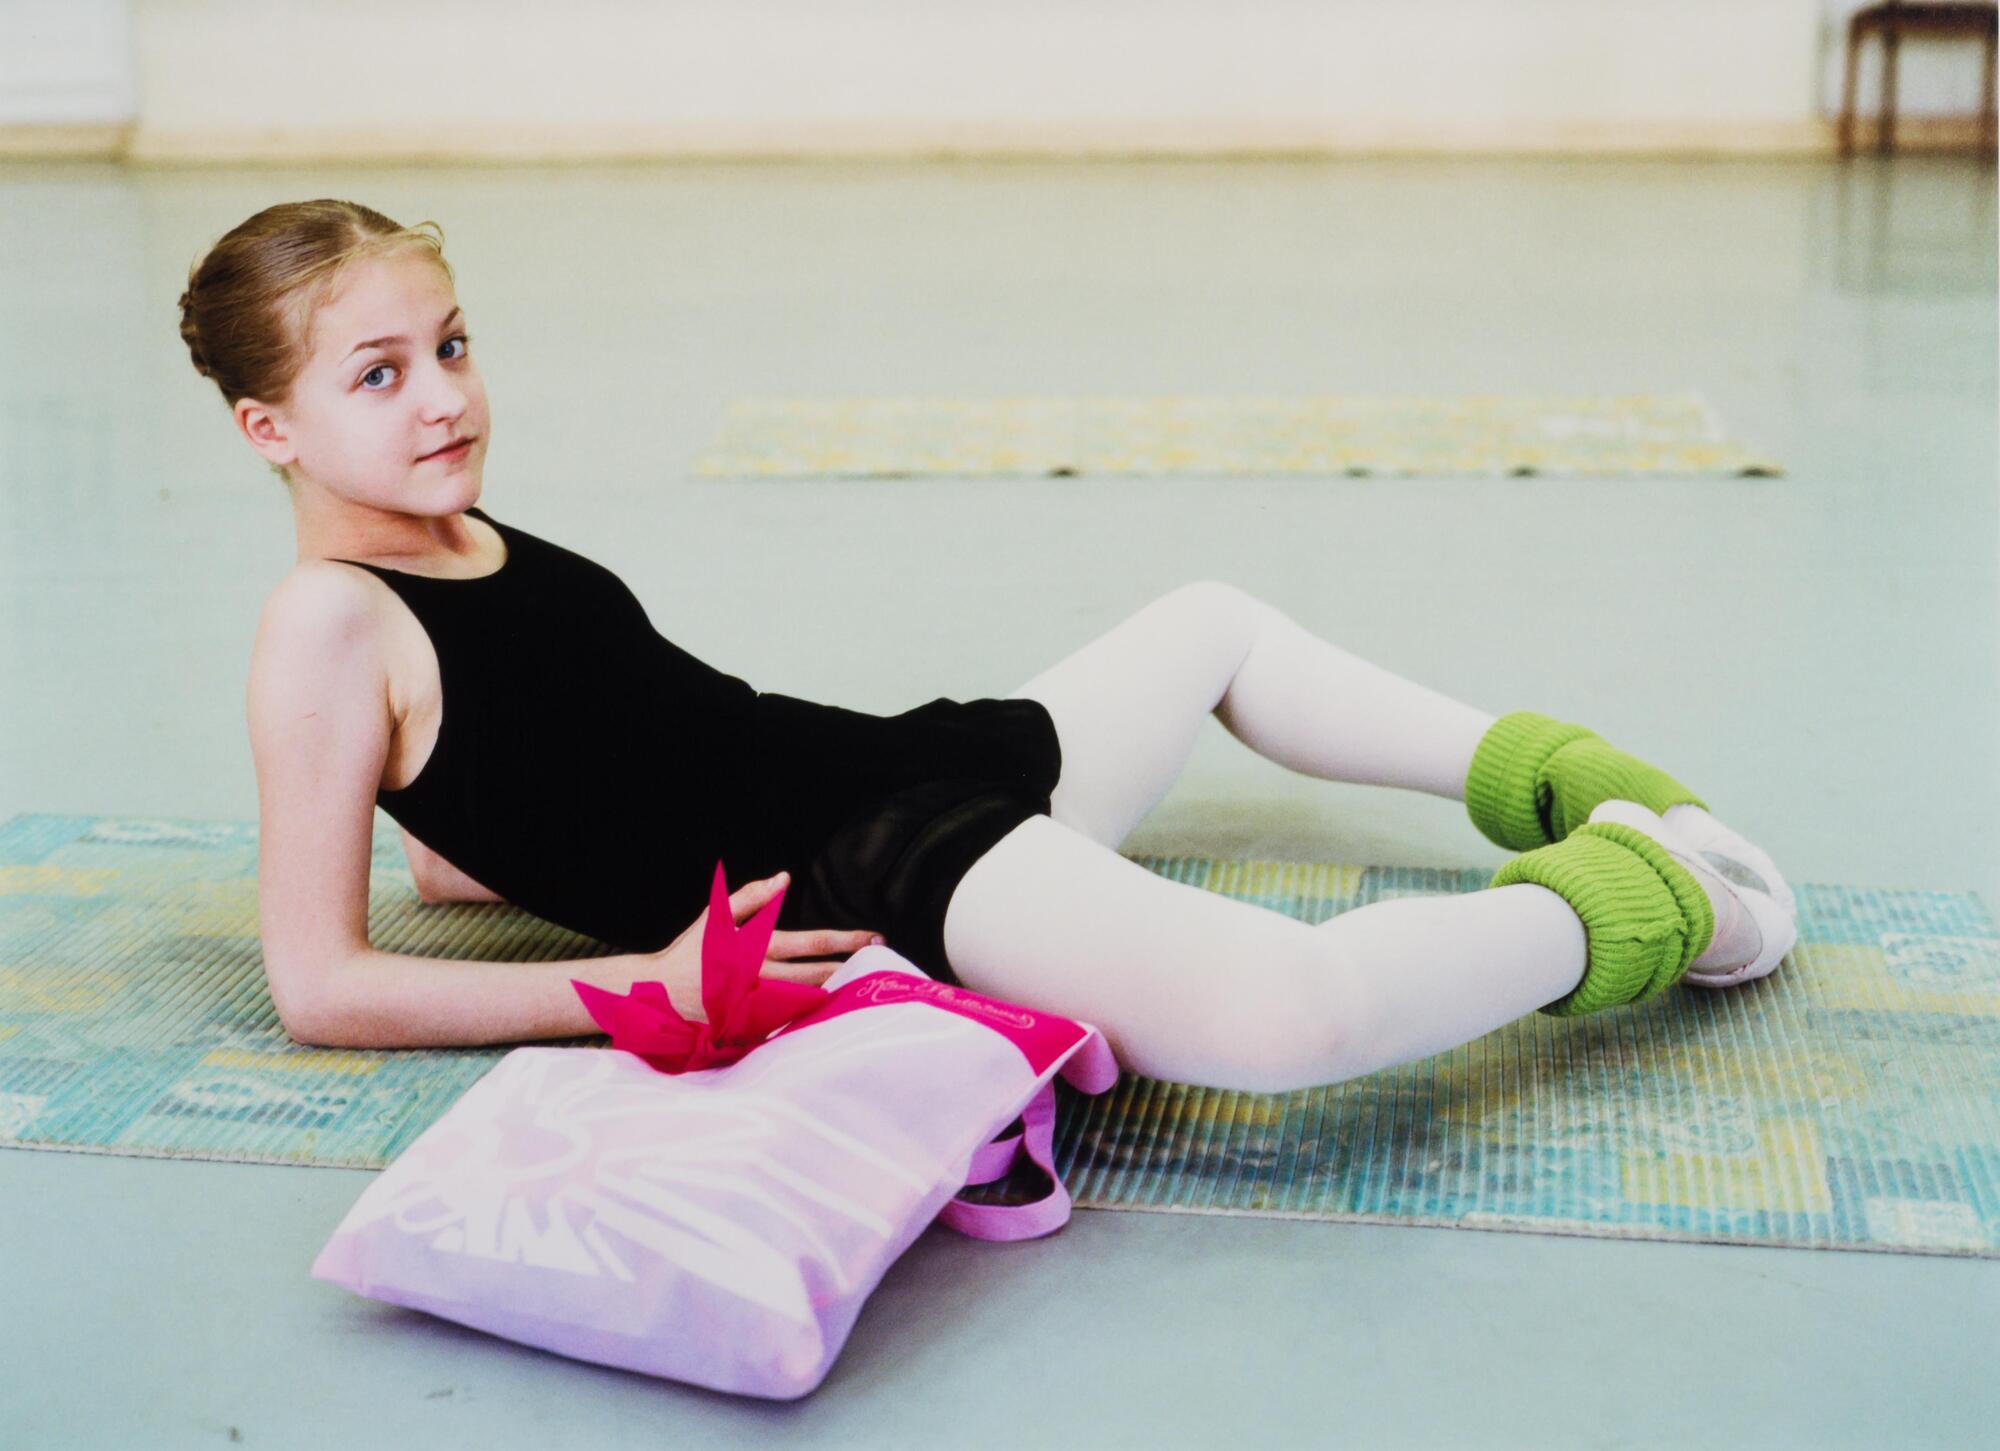 A girl in a black leotard, pink tights and green leg warmers lounging on a light blue floor.